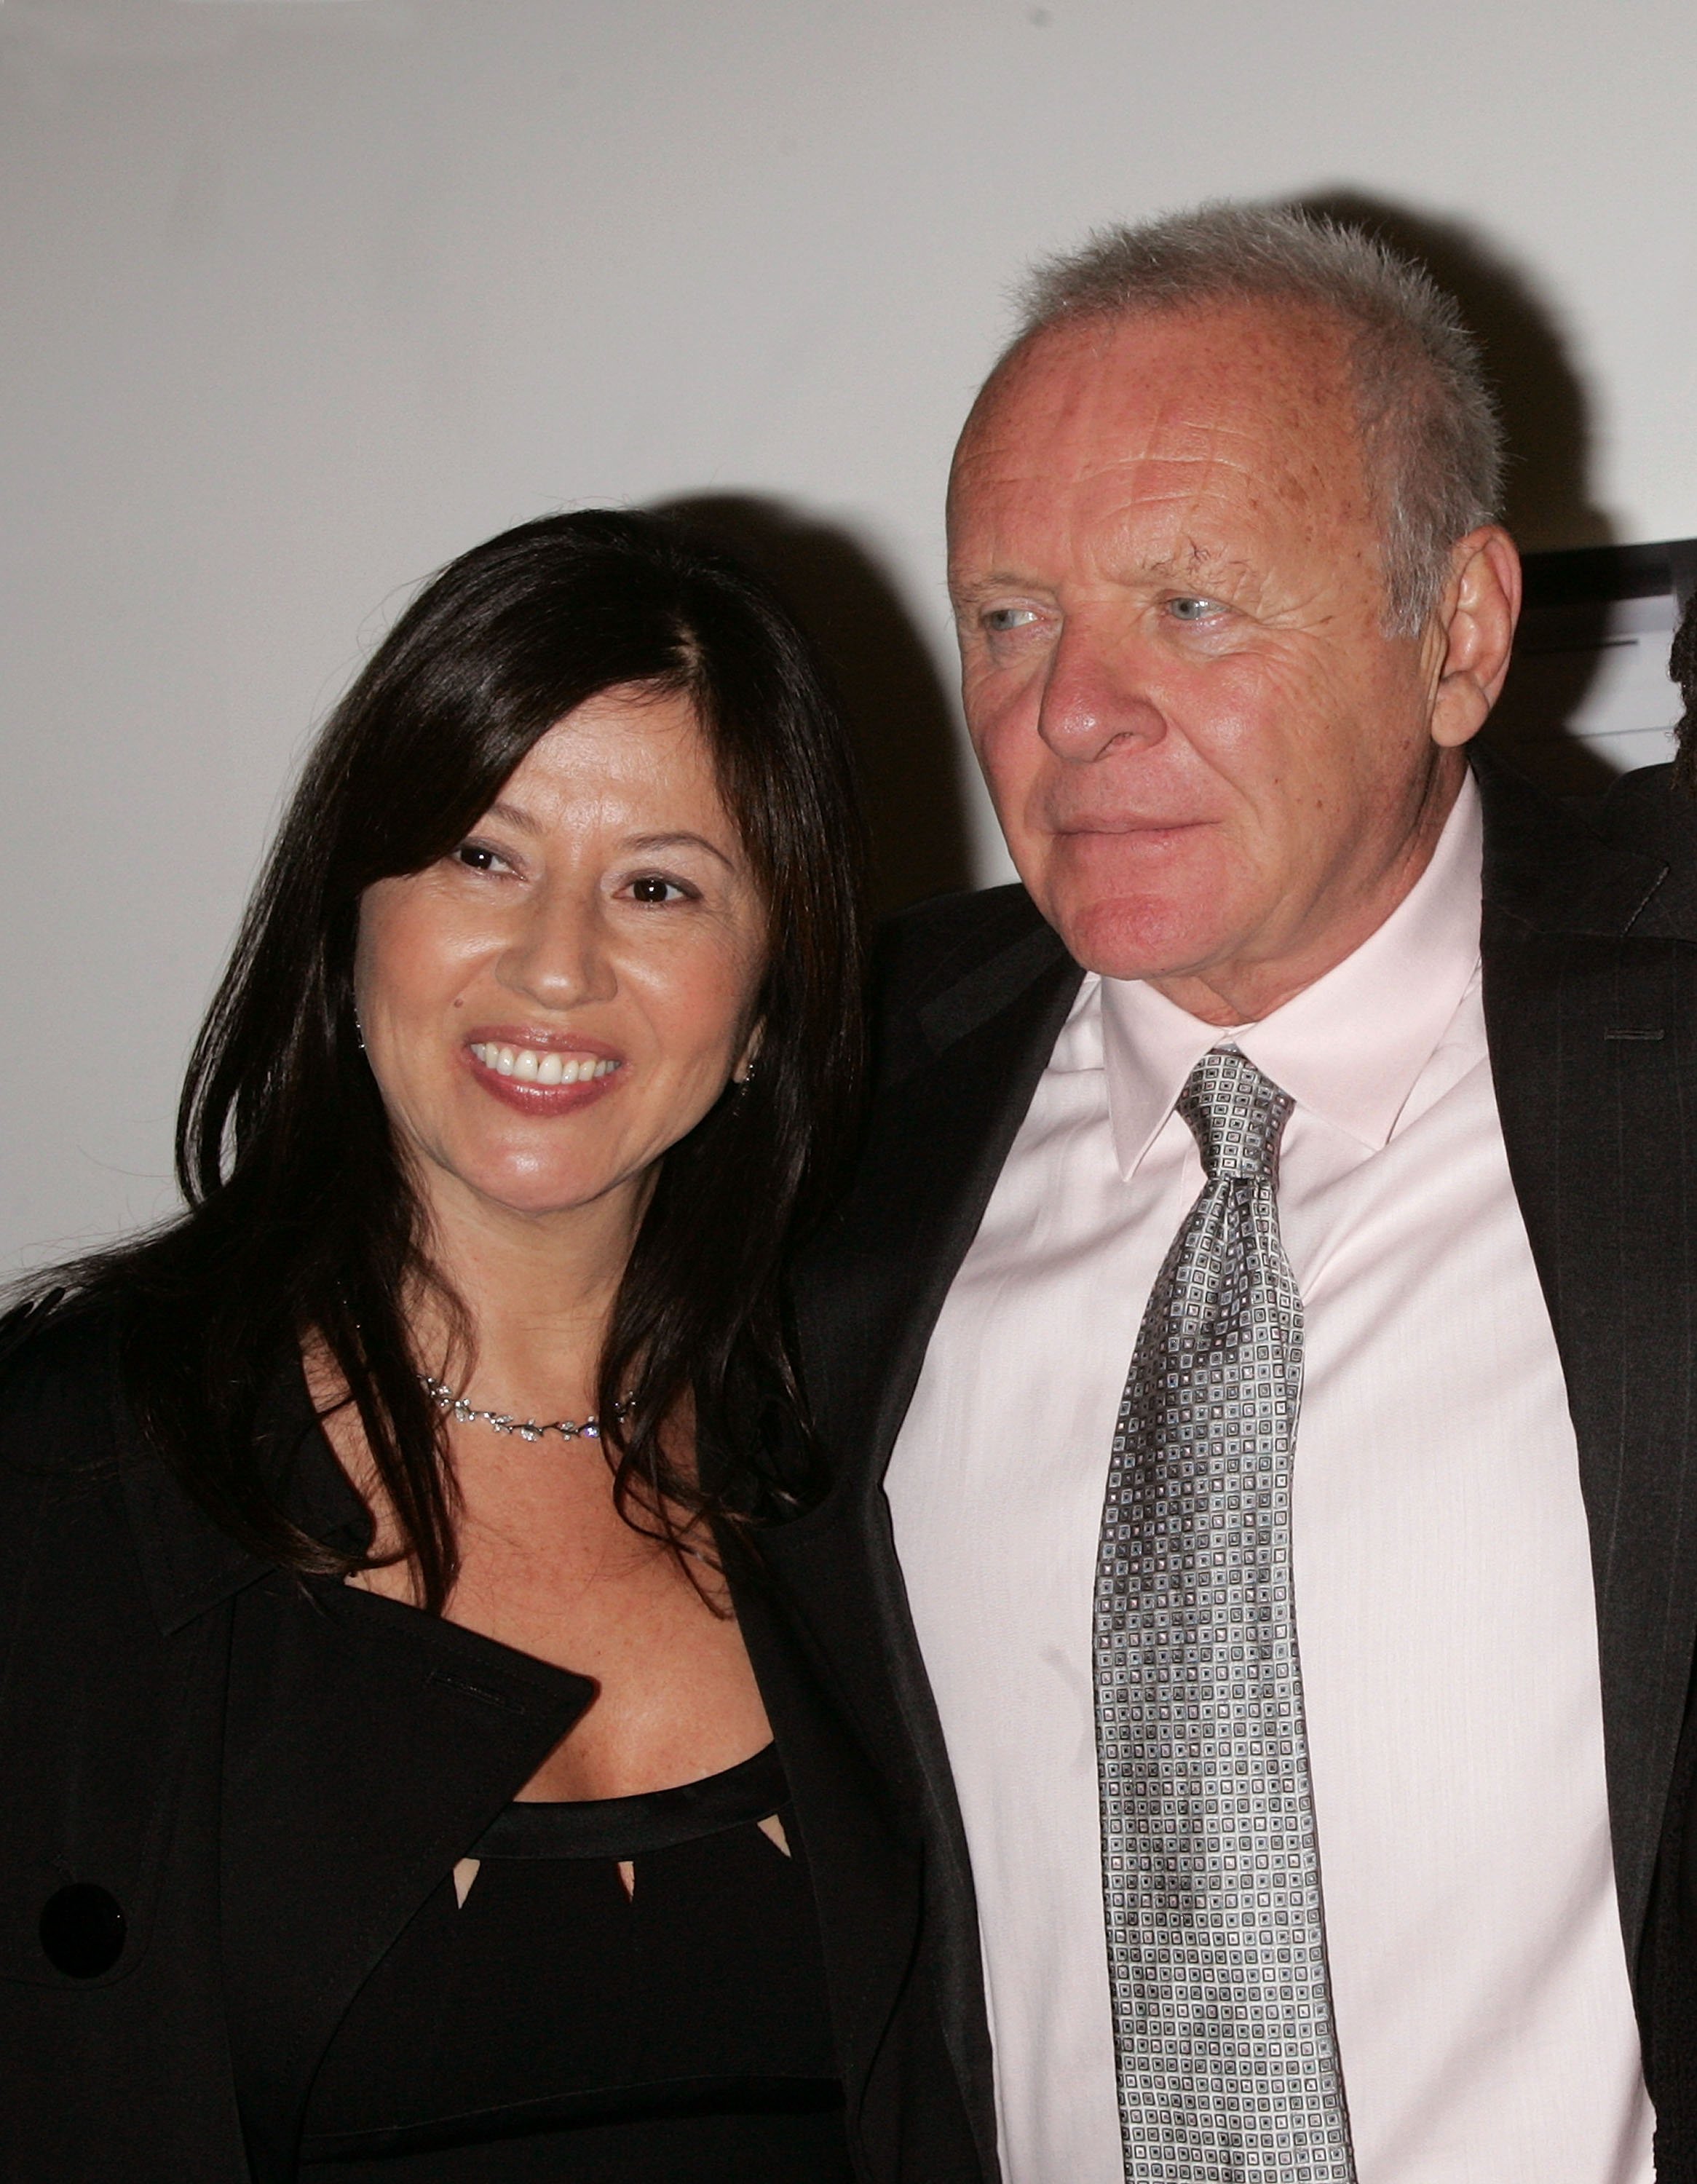 Stella Arroyave and Anthony Hopkins arriving at "Slipstream" premiere at Roy Titus Theater, on October 18, 2007 in New York City. / Source: Getty Images